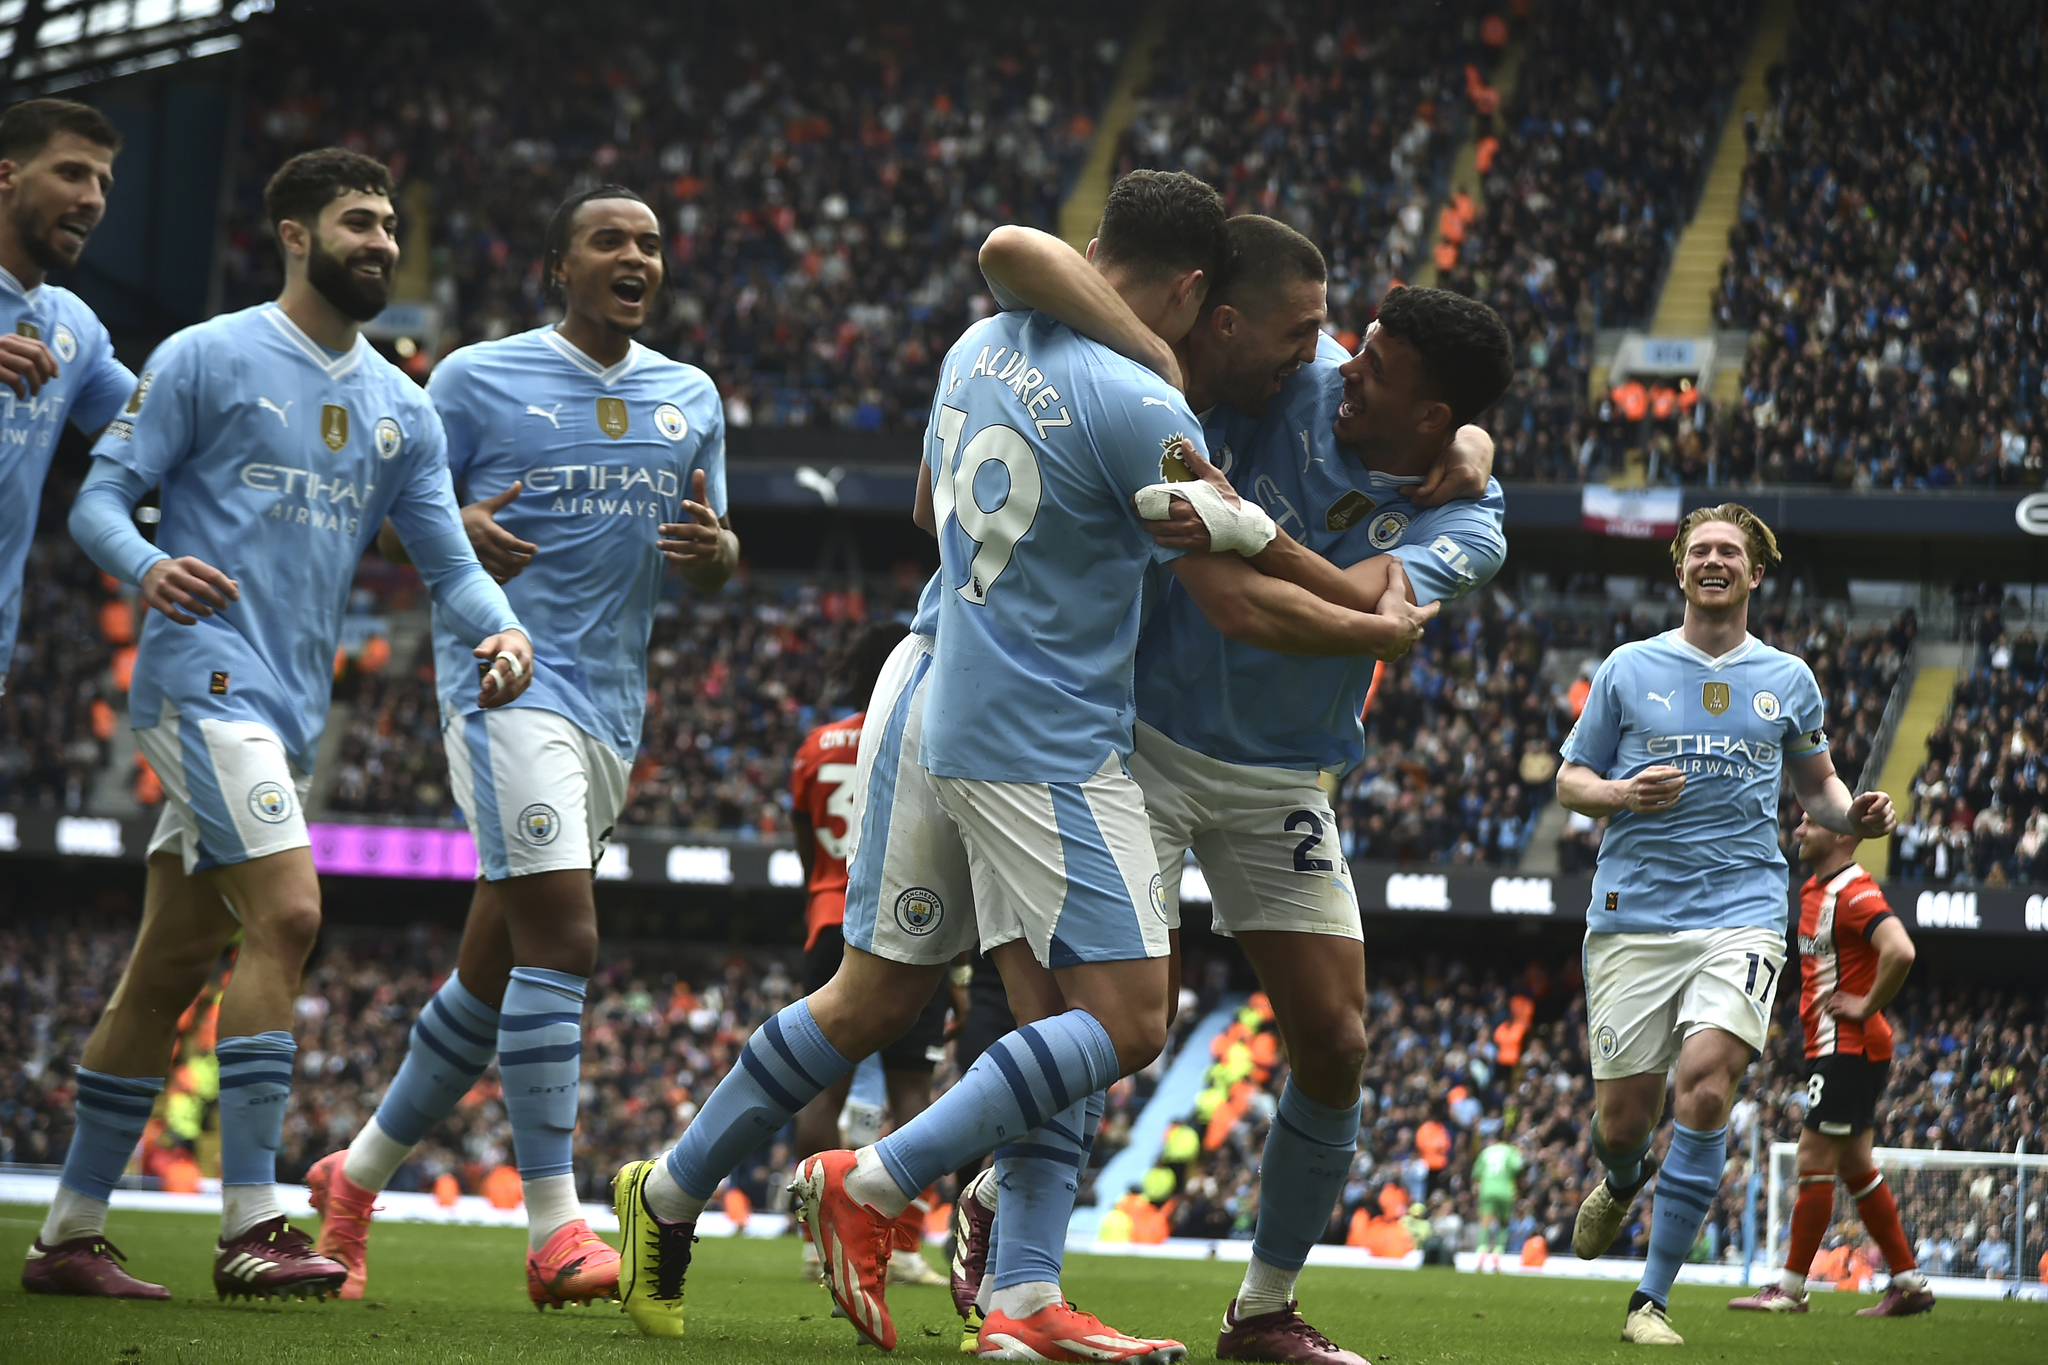 Manchester City players celebrate after Mateo Kovacic scored his sides second goal